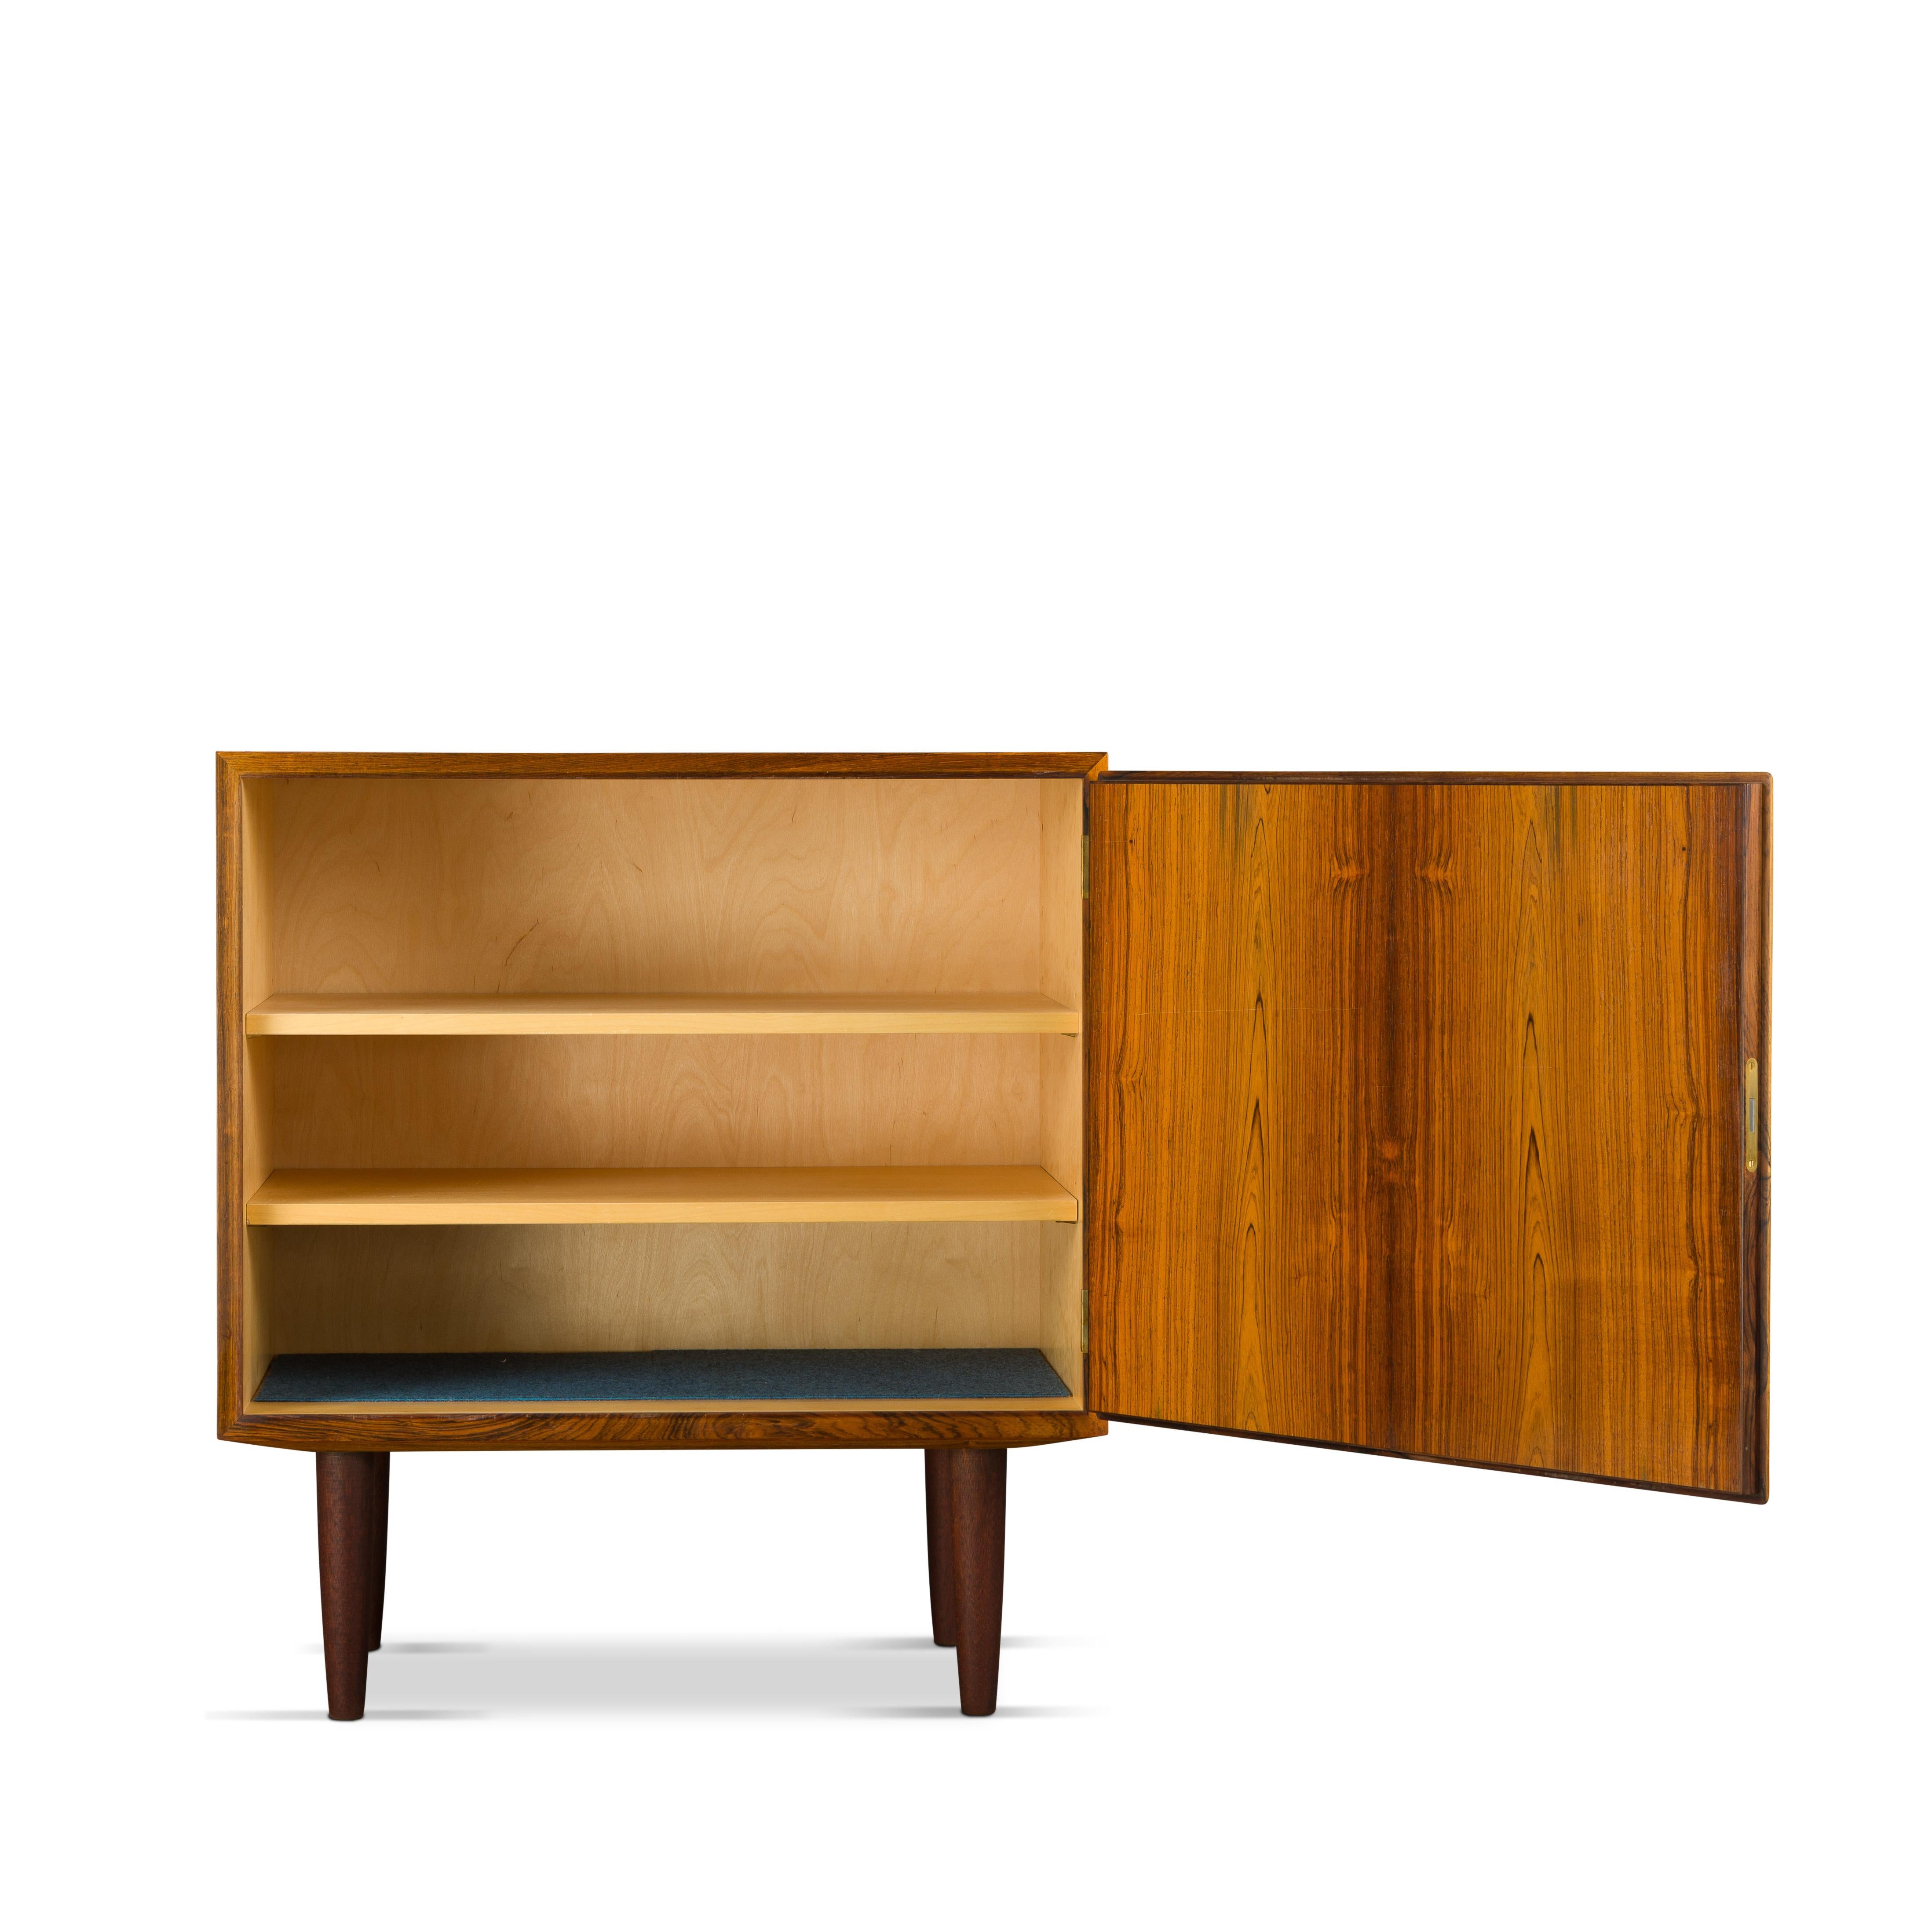 Designed by Carlo Jensen and made by Hundevad & Co. This rosewood small one door side board is truly beautiful. Two adjustable shelves in this credenza.